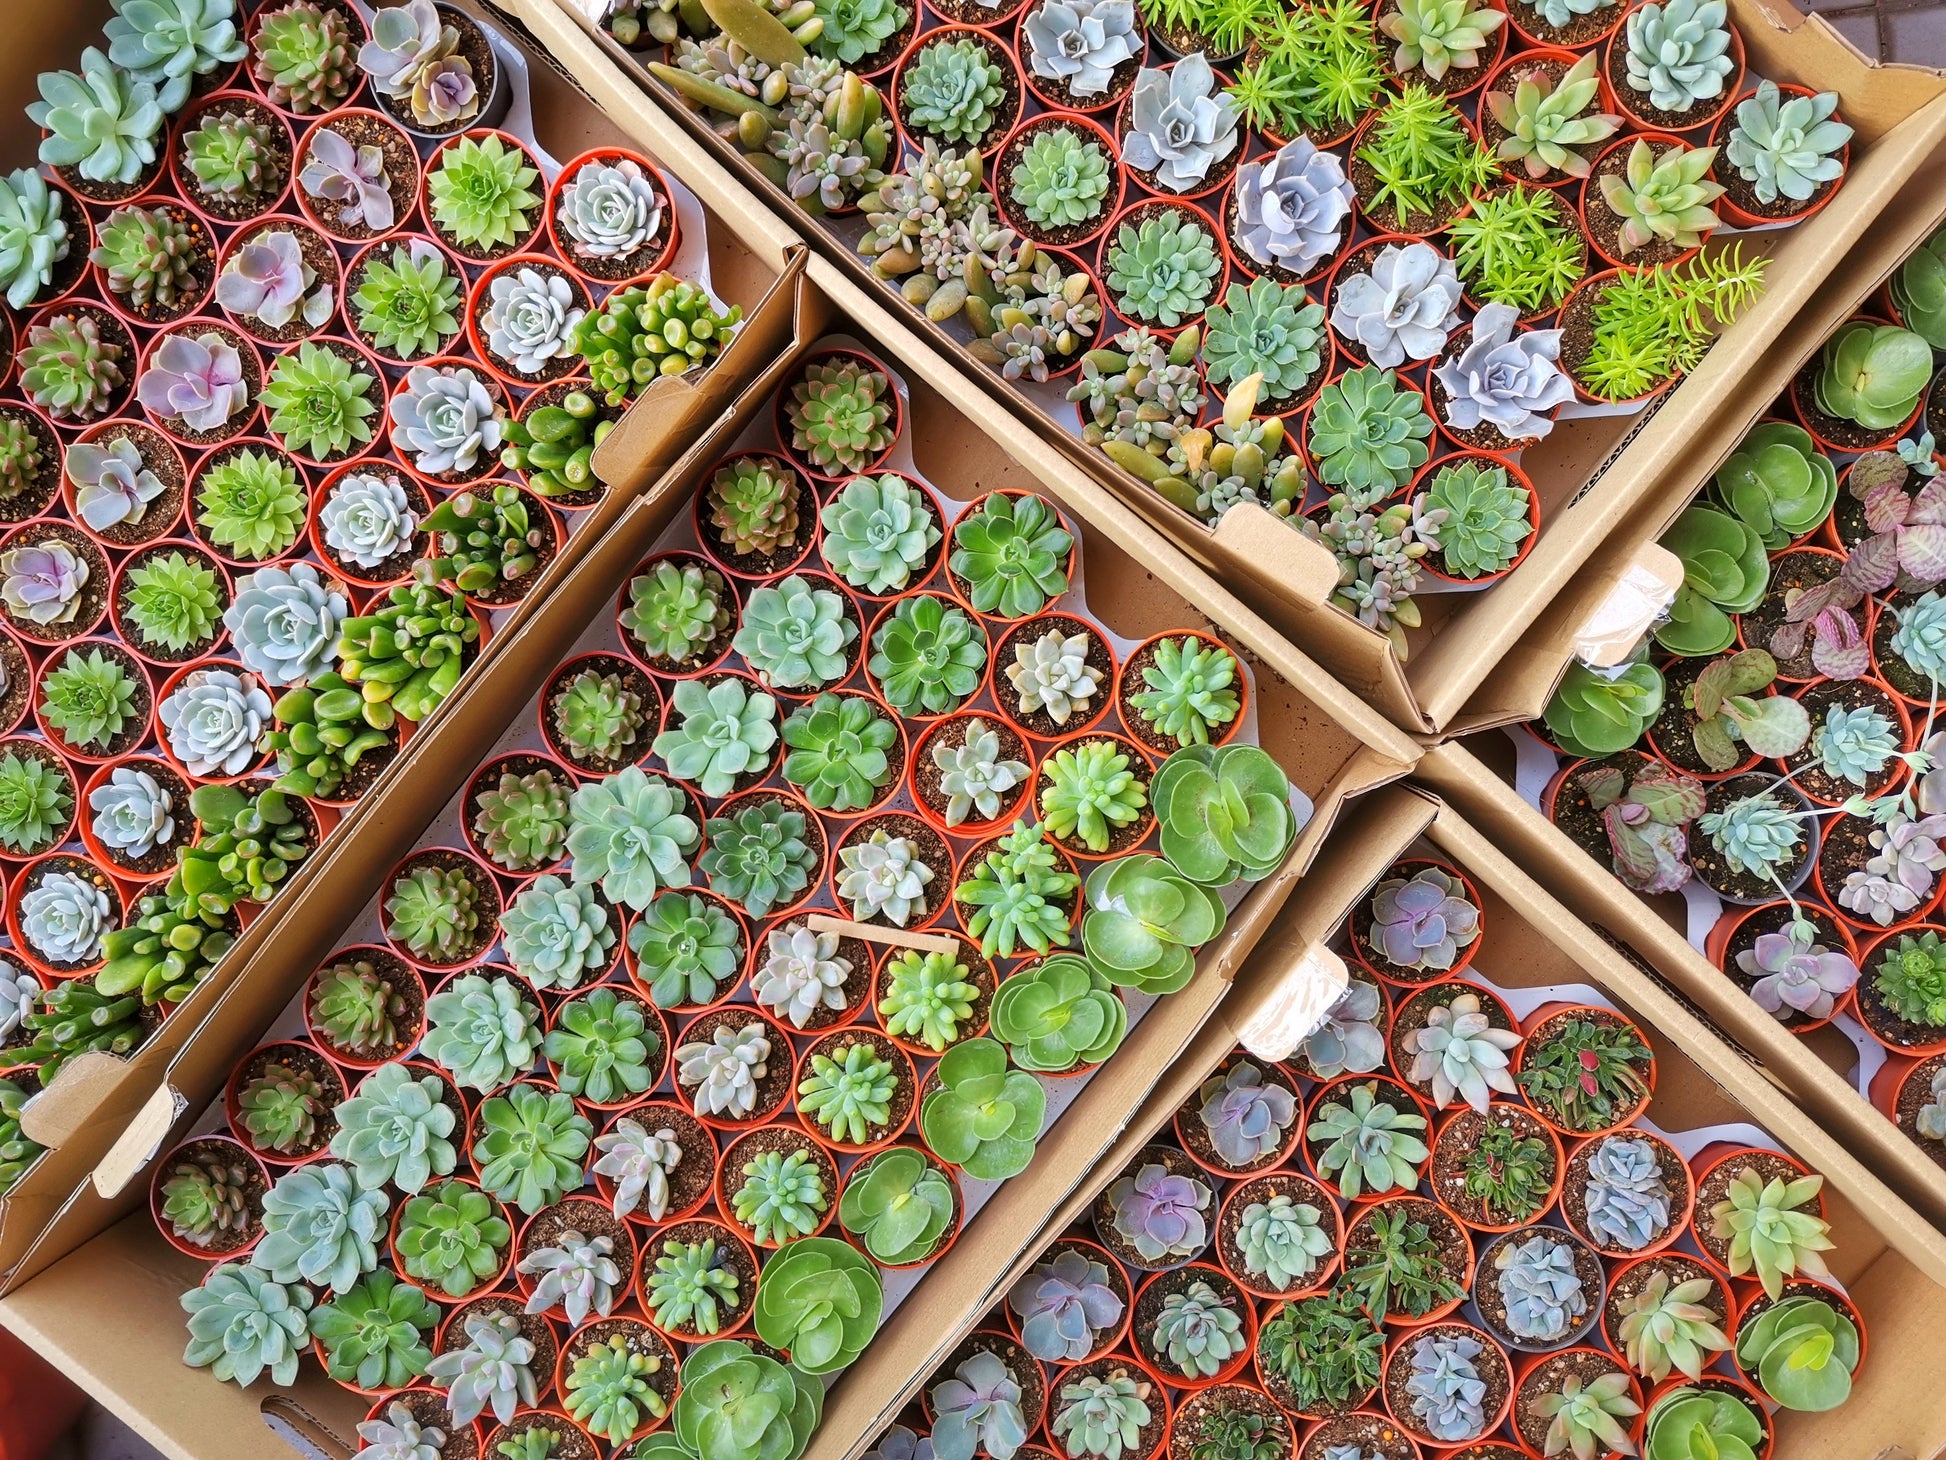  Succulent for Sale - Explore our selection of beautiful and healthy succulents, perfect for adding greenery to any space